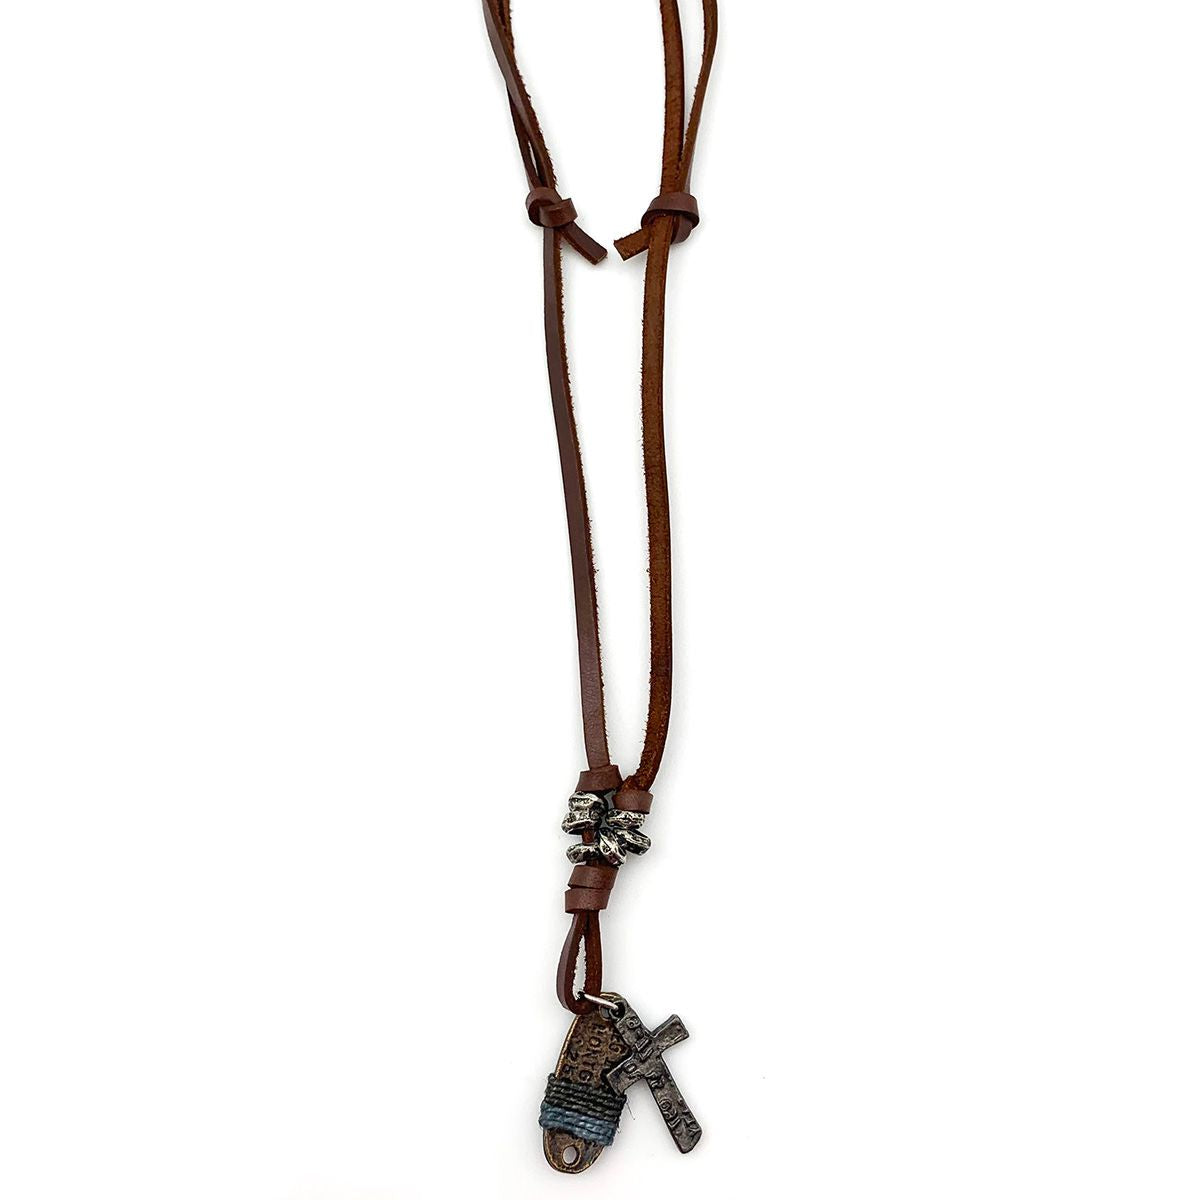 leather necklace with cross and tag pendants on a white bacground.